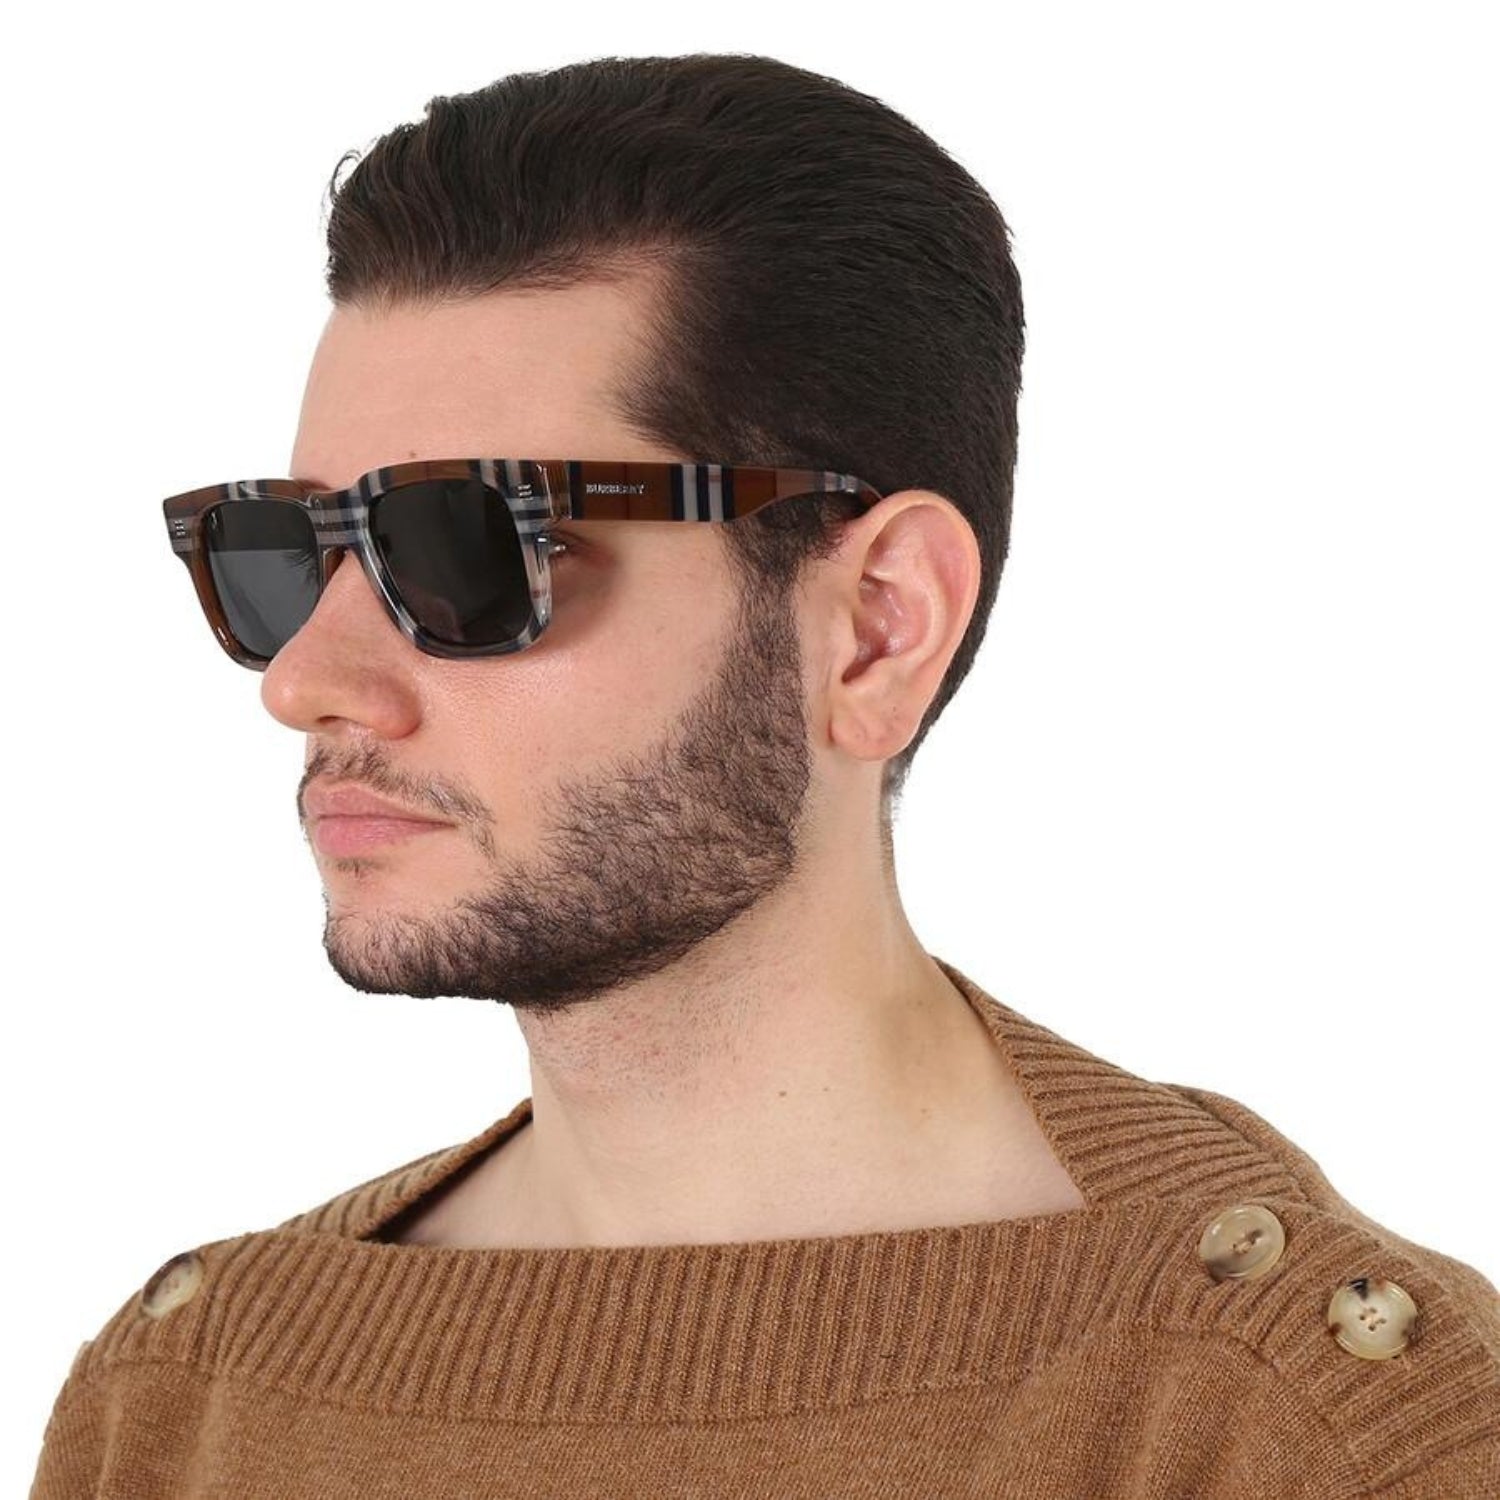 mens-burberry-brown-check-sunglasses-0be4394-396687